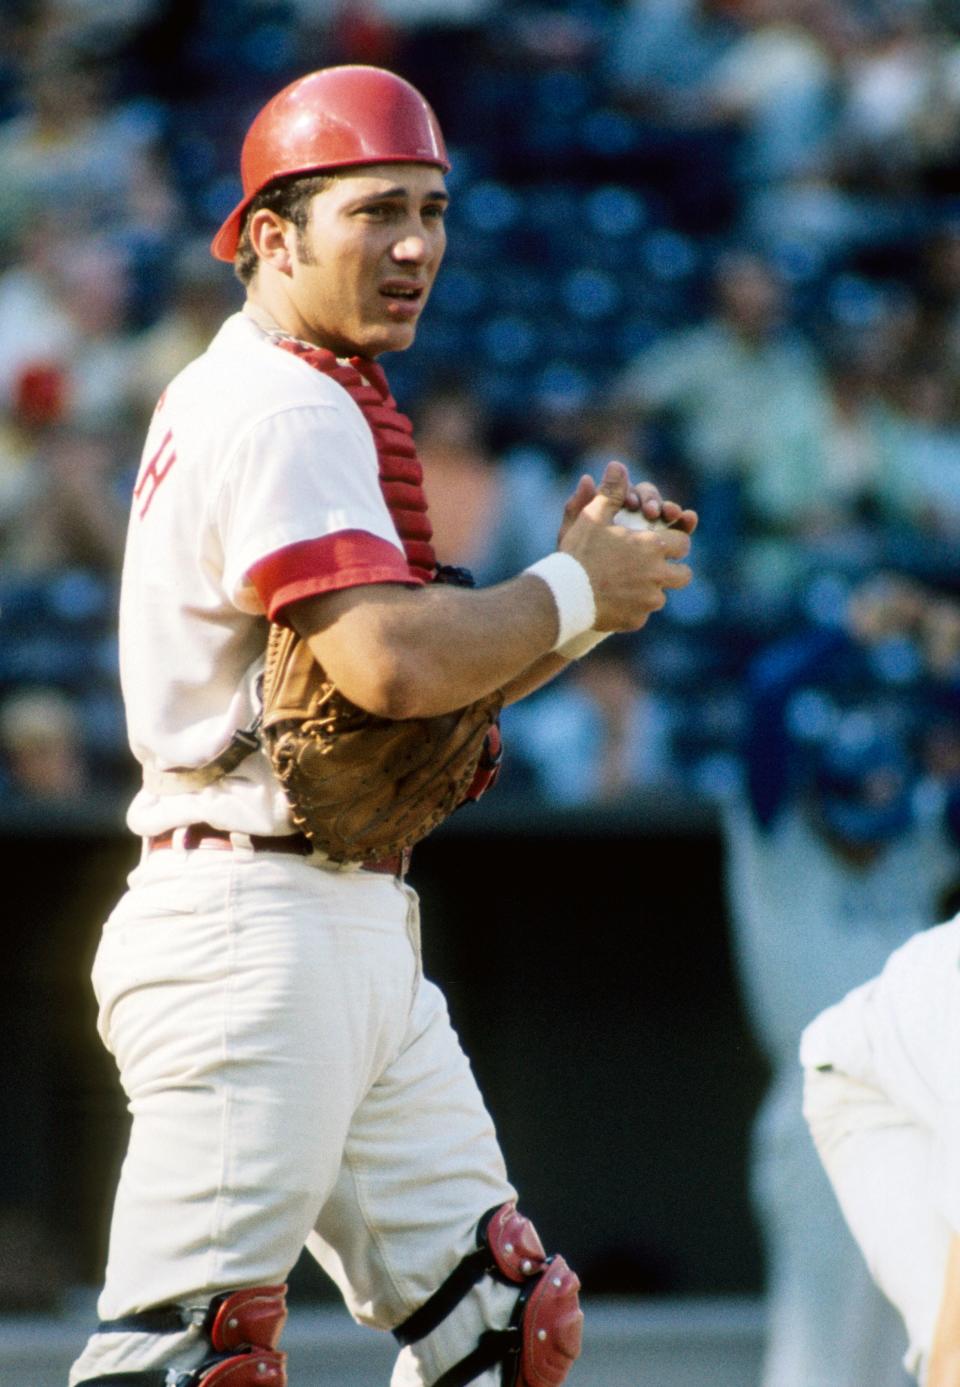 Oct 1970; Cincinnati, OH, USA; FILE PHOTO; Cincinnati Reds catcher Johnny Bench in action during the 1970 season at Riverfront Stadium. Mandatory Credit: Malcolm Emmons-USA TODAY Sports